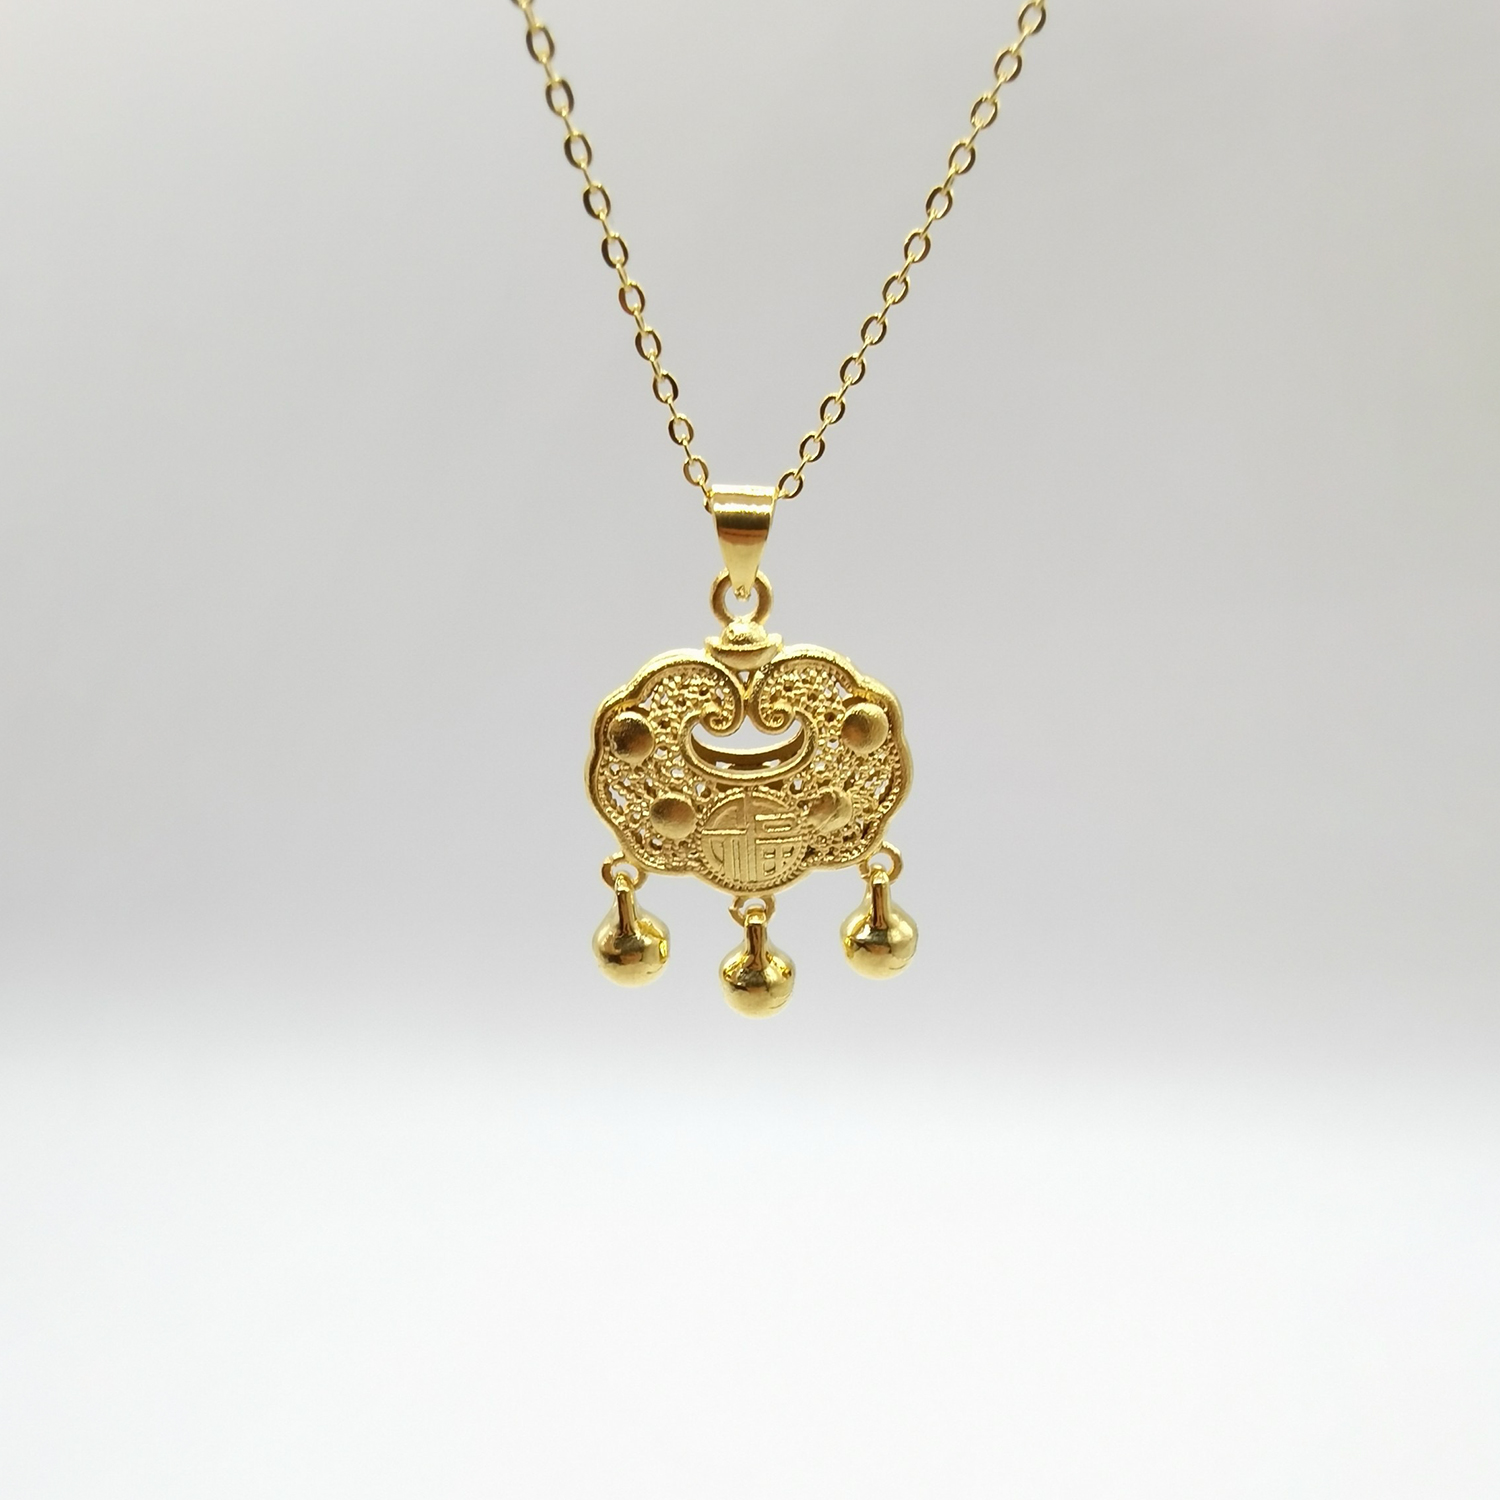 Alluvial gold ancient method vacuum electroplating 24K gold hollow peace lock necklace with blessing character